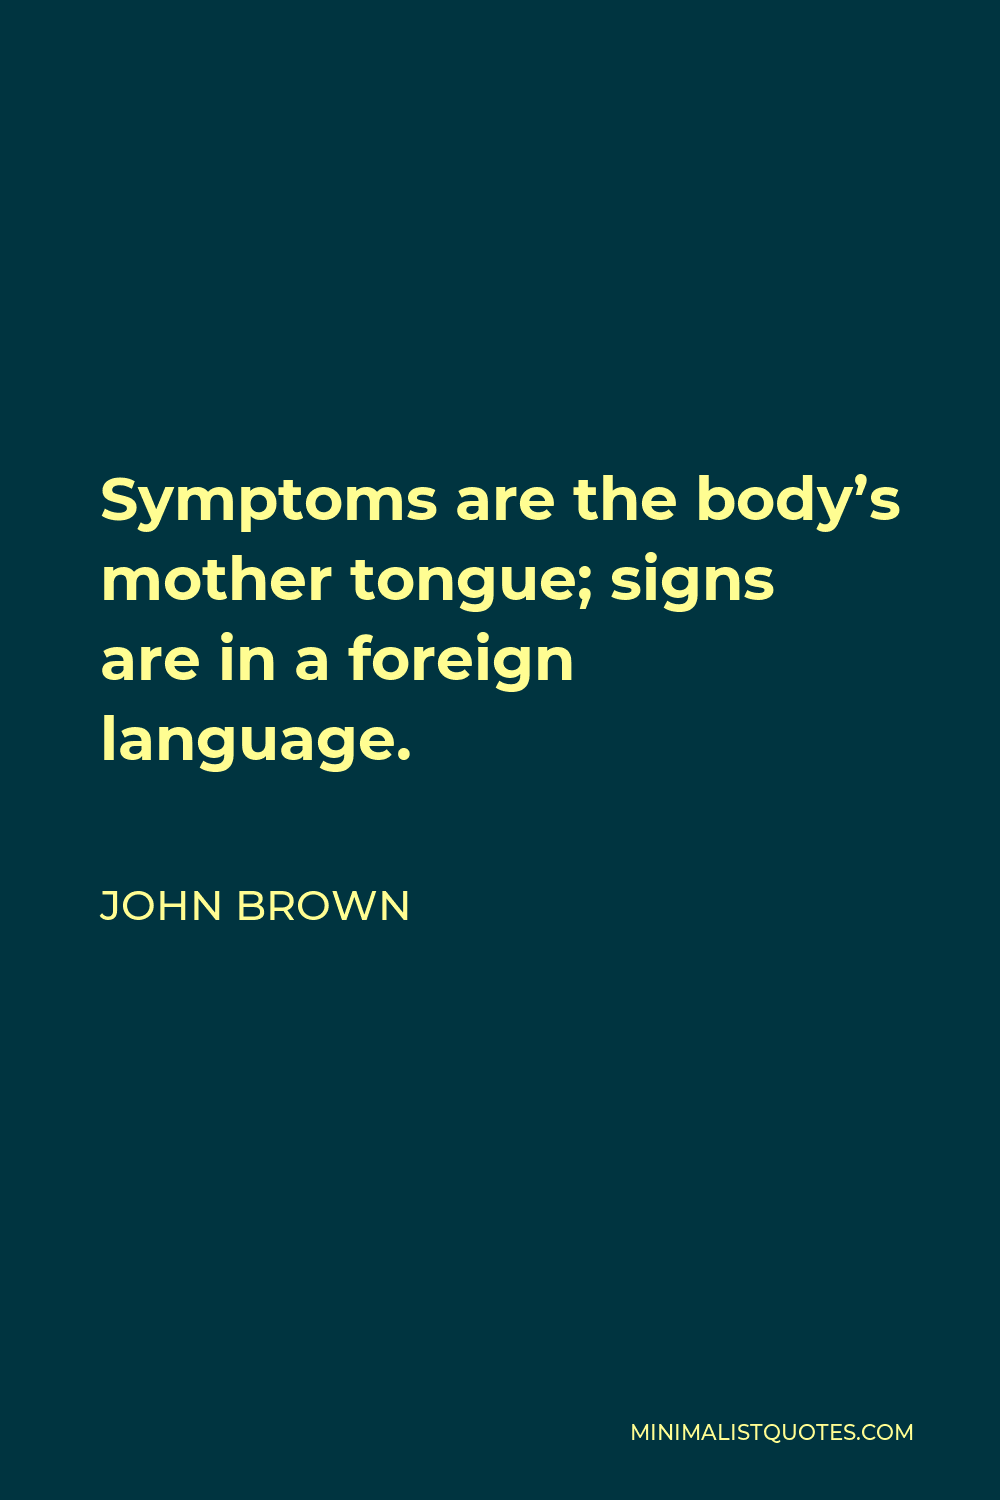 John Brown Quote - Symptoms are the body’s mother tongue; signs are in a foreign language.